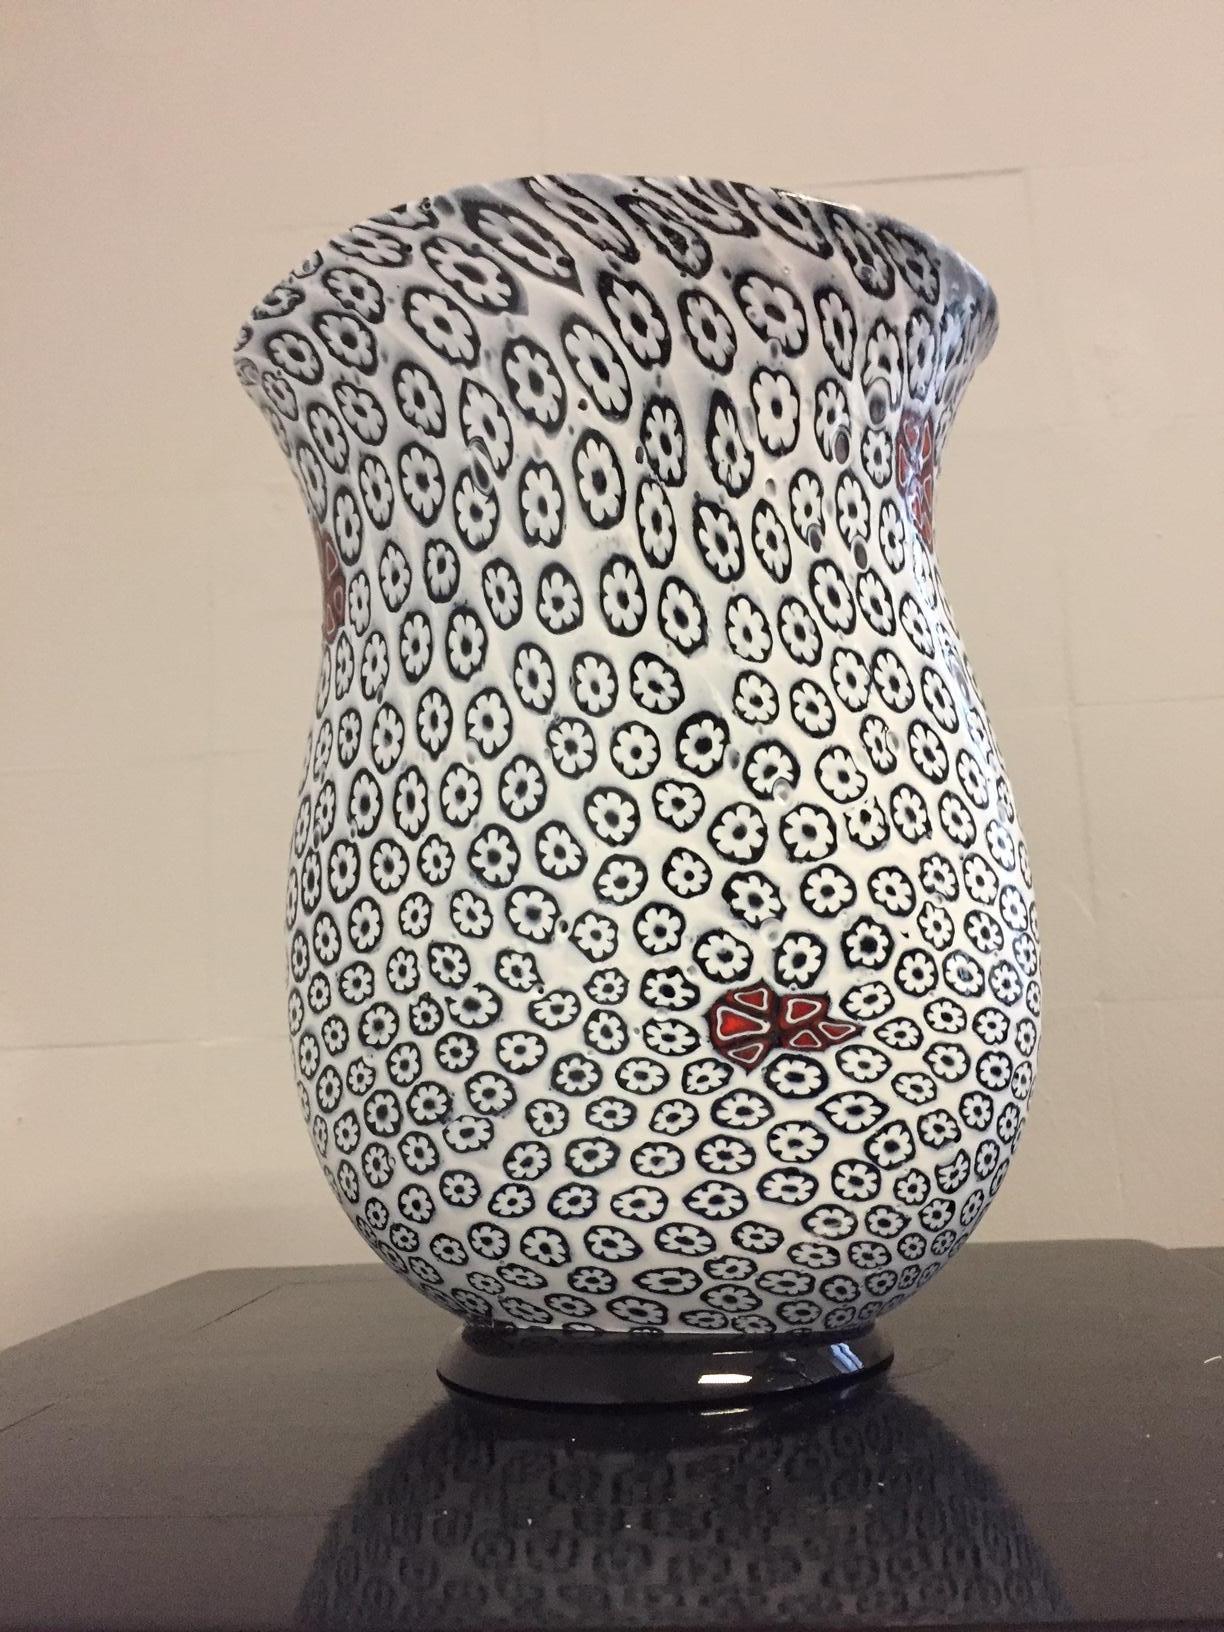 Unique vase in floral pattern, color white and black with random red, rust blossoms has highlights, organic oval shape. Measures: H 30 cm x 23 cm, Signed Tino Rossi 1/1 at the bottom plate
Perfect condition,
Former Owner Guenter Netzer, Footballer.